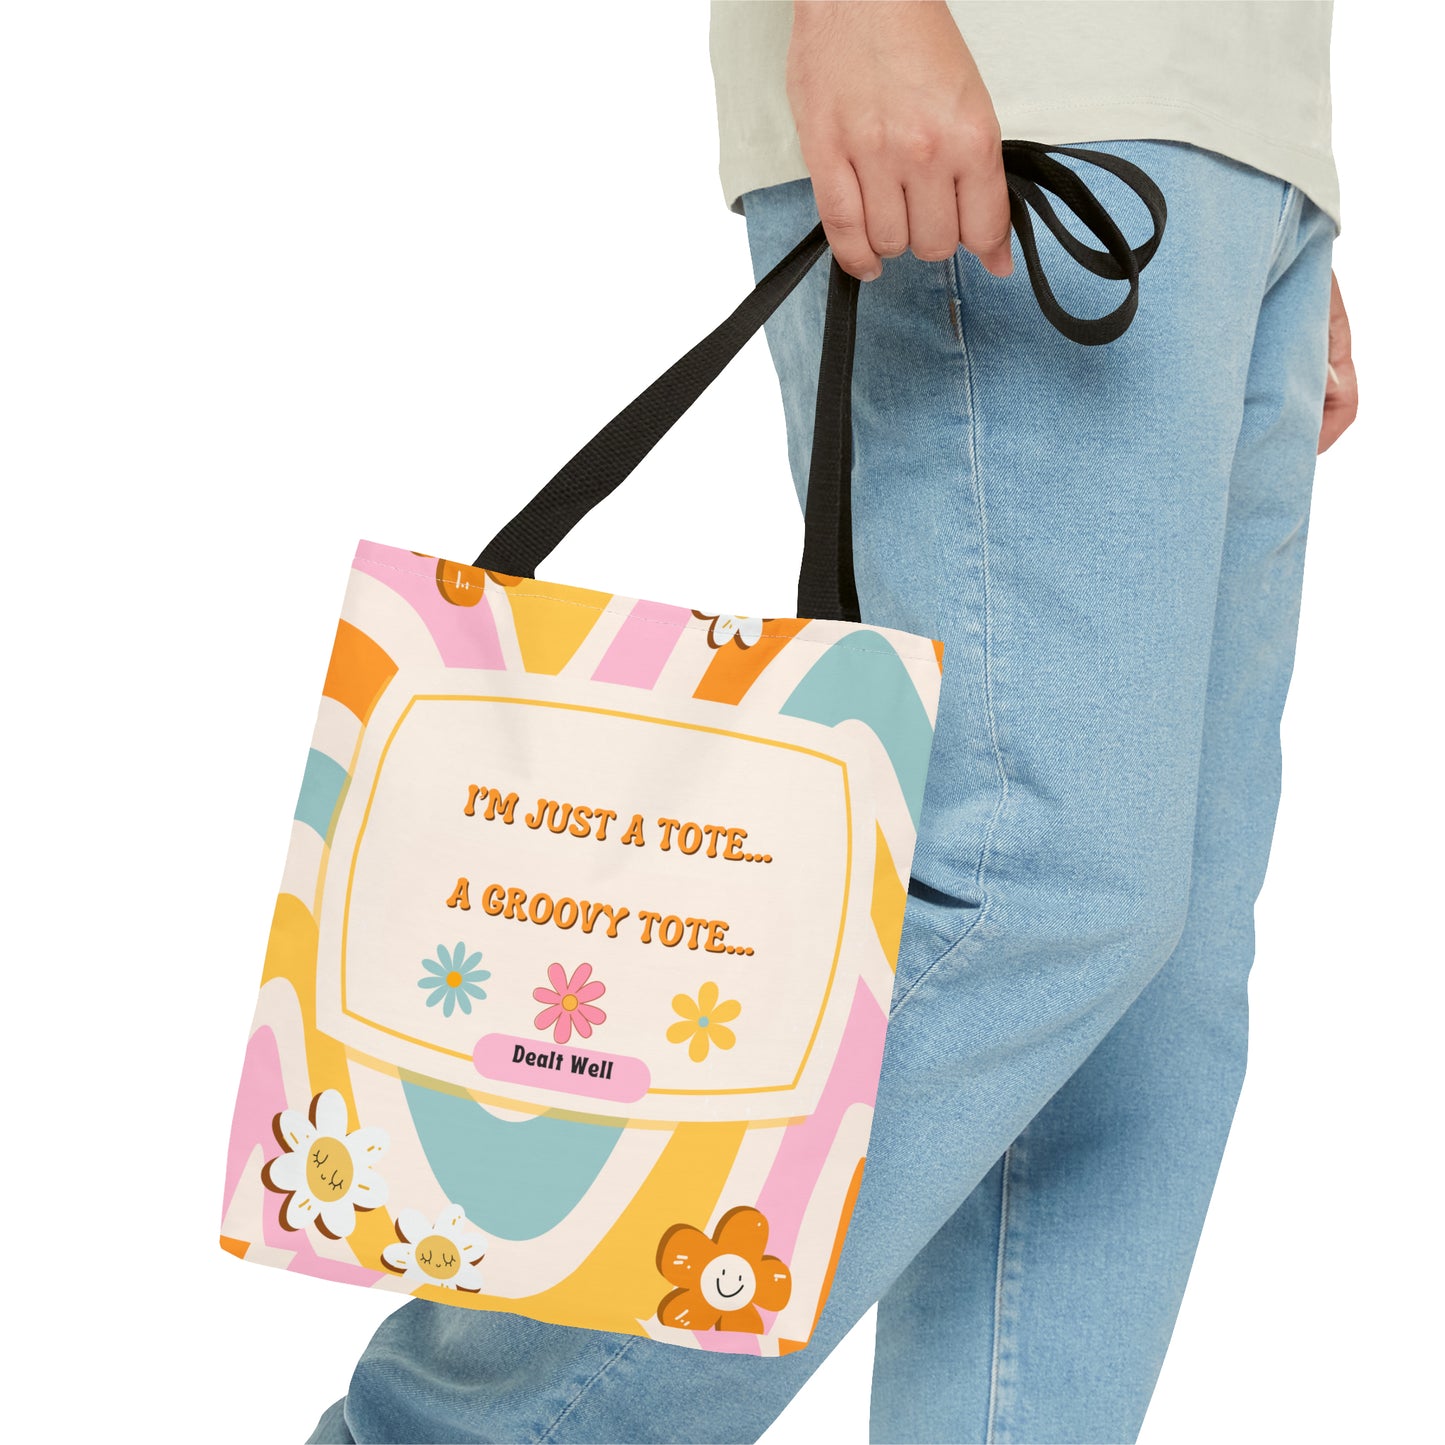 A Groovy Tote